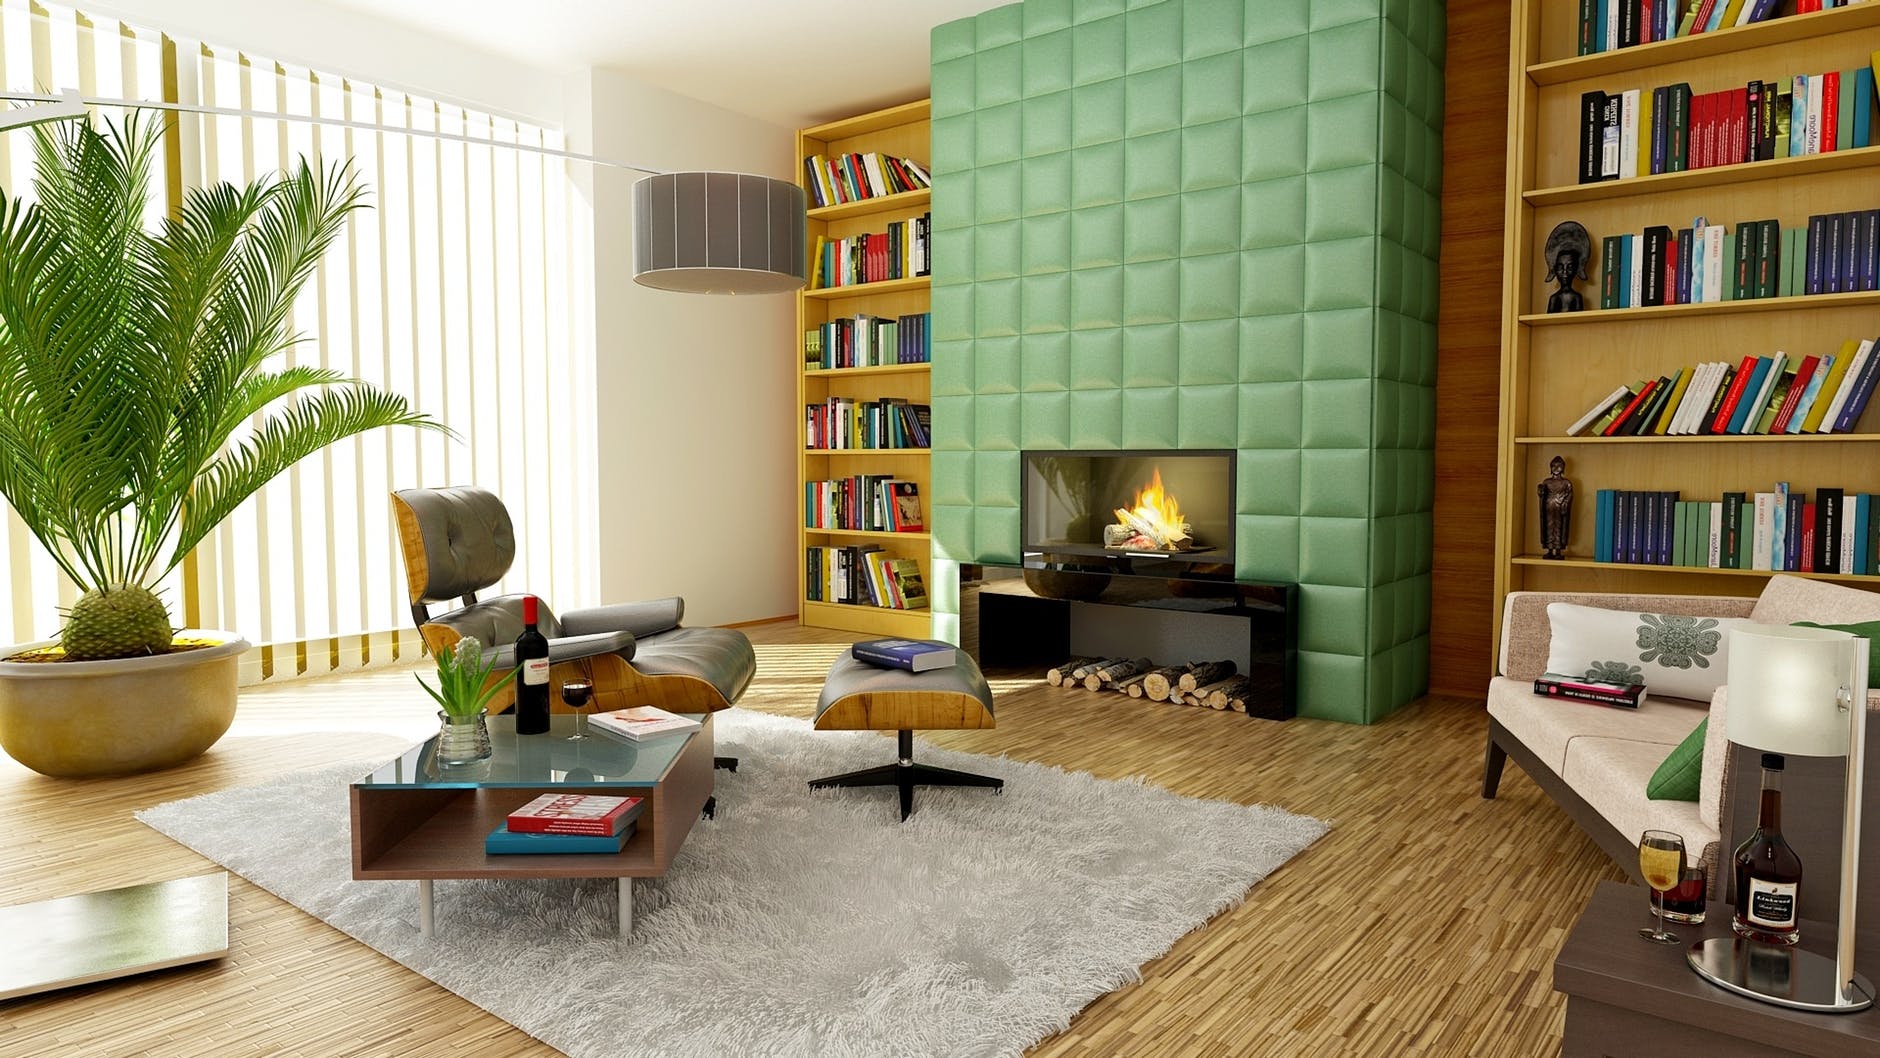 A small living room with a fireplace and bookshelves, decorated with space-saving hacks.